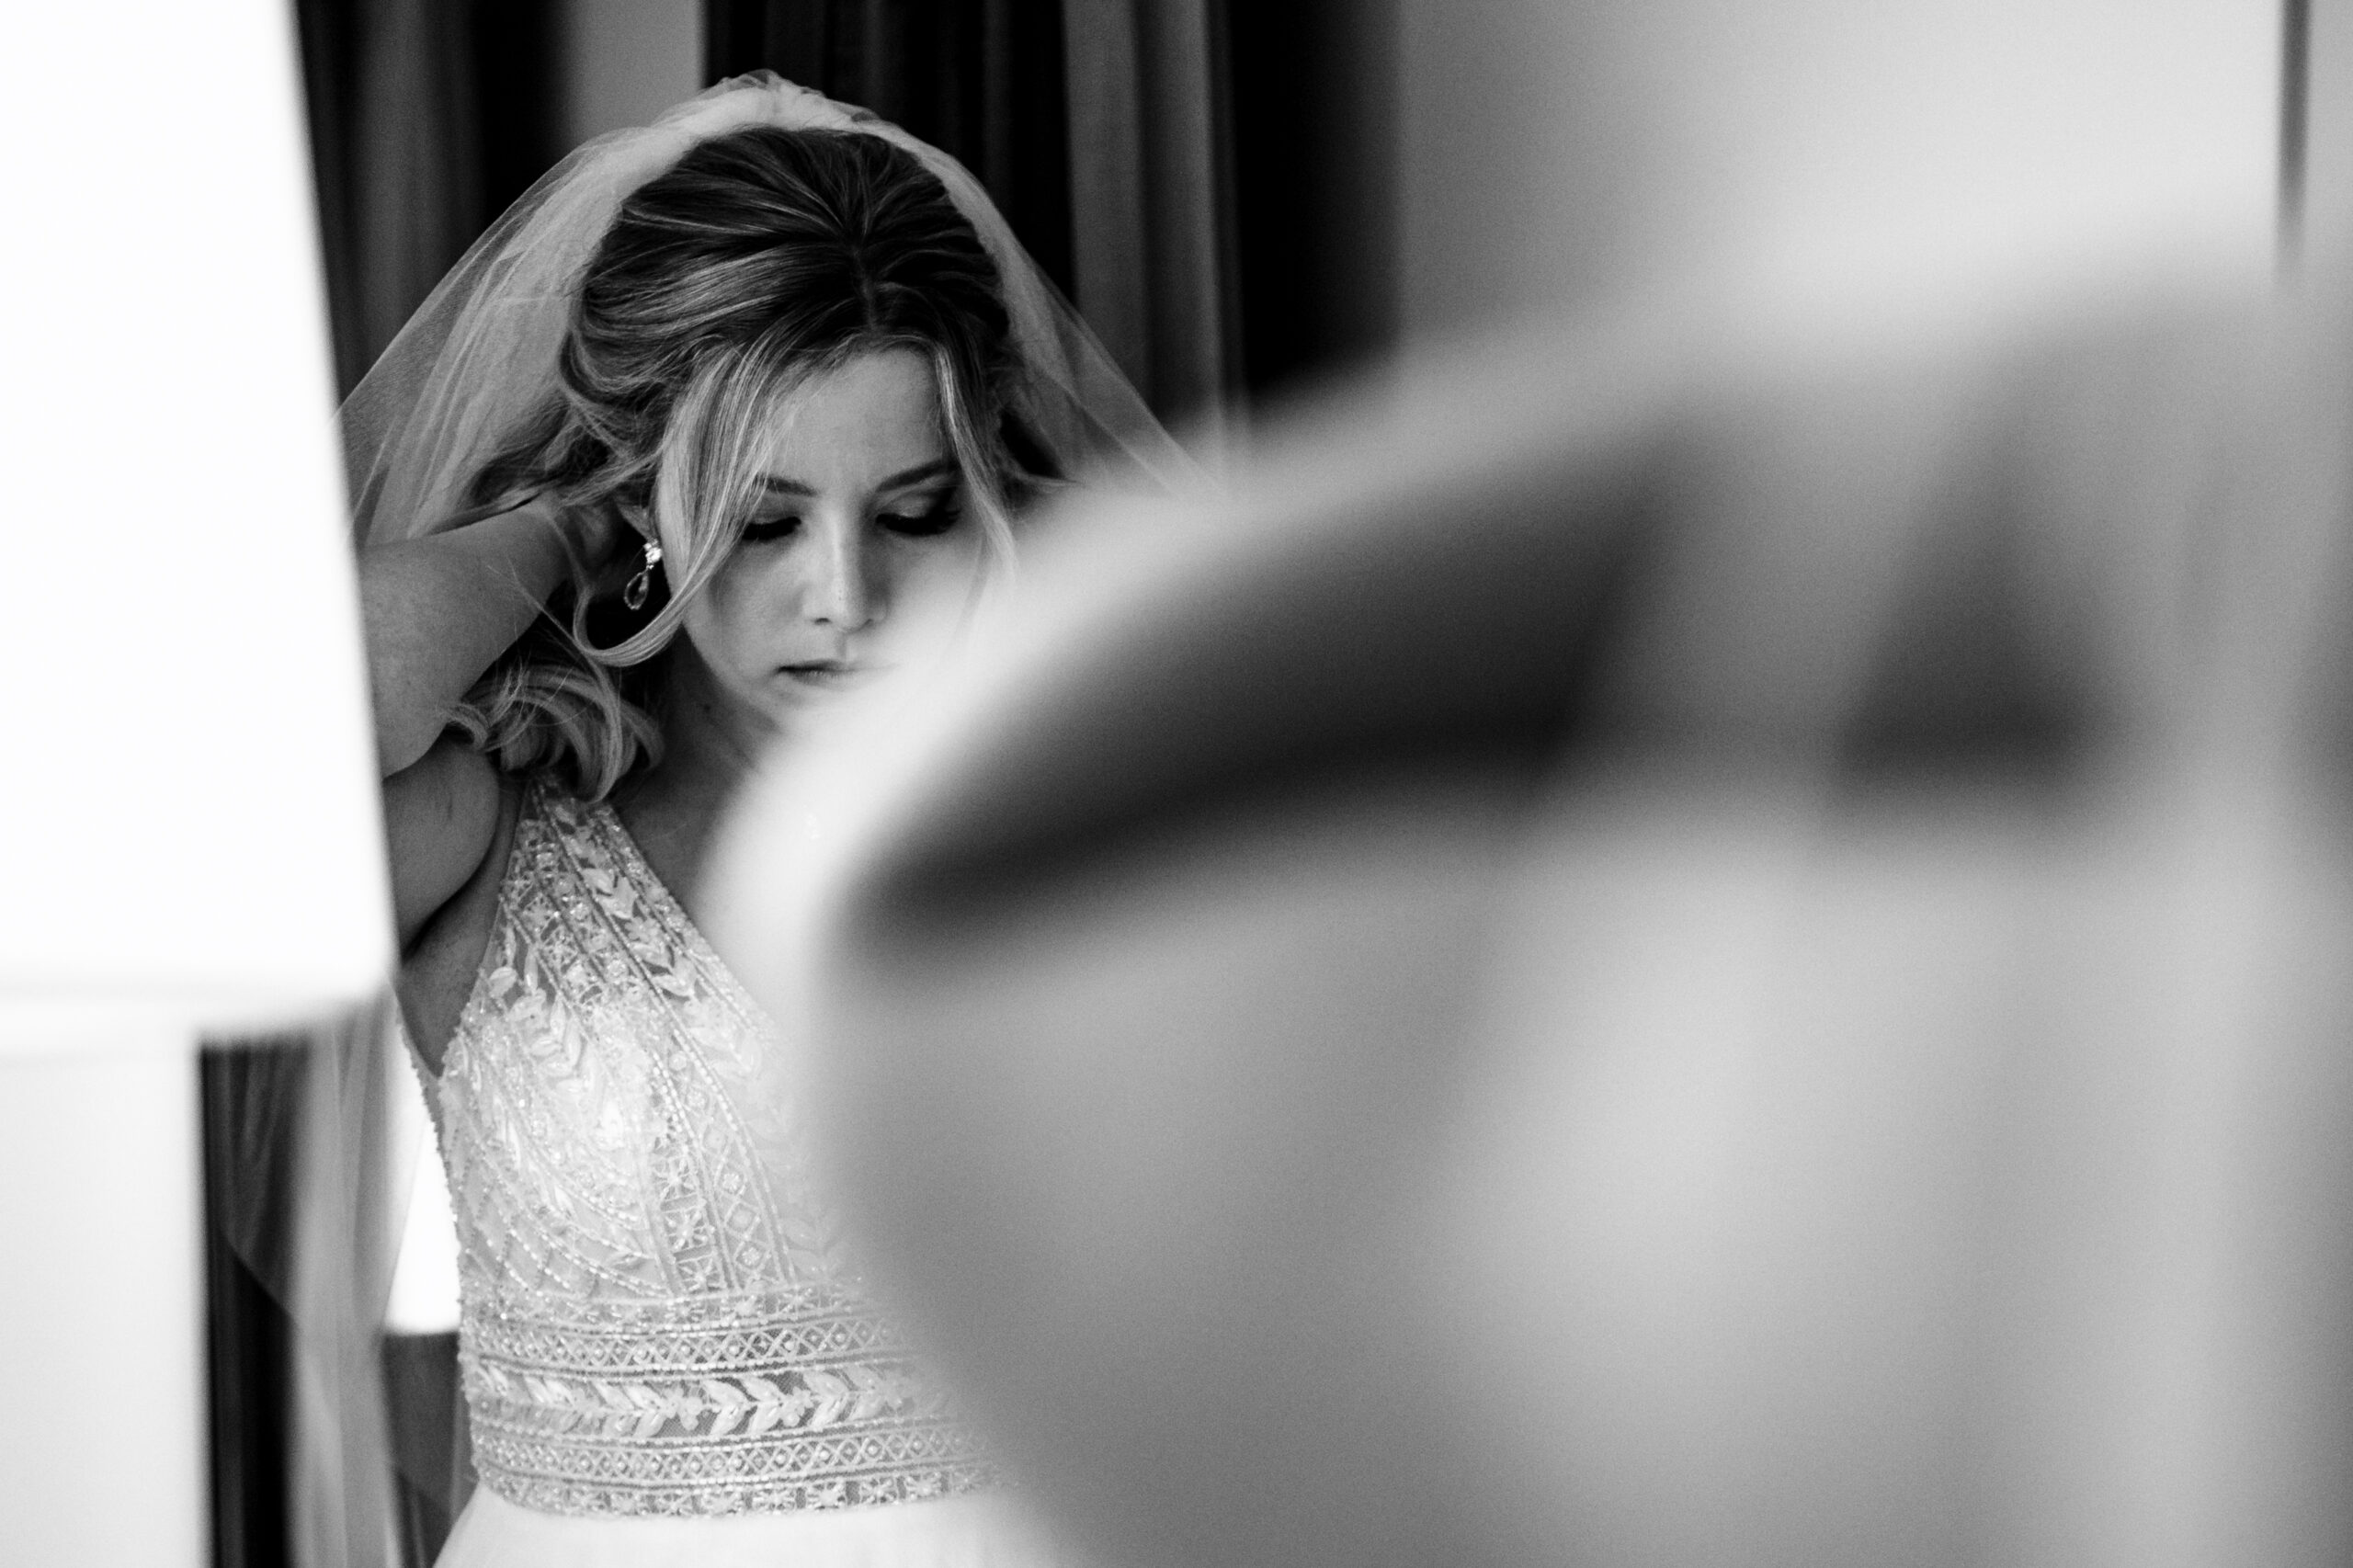 mirror reflection bride in mirror putting on a necklace black and white photo